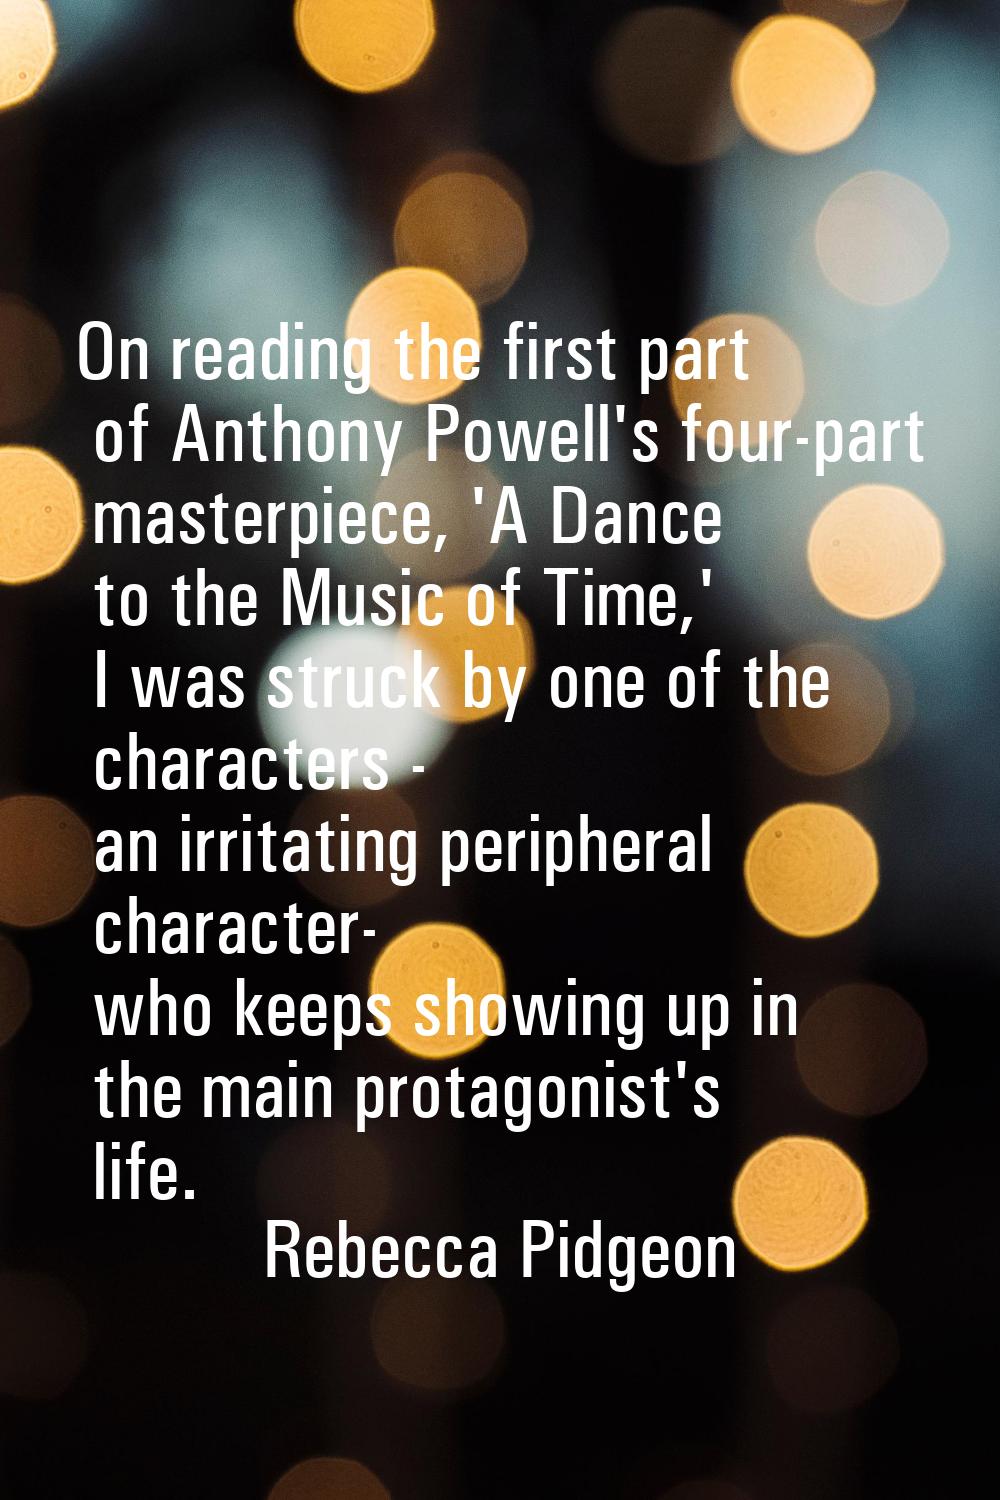 On reading the first part of Anthony Powell's four-part masterpiece, 'A Dance to the Music of Time,